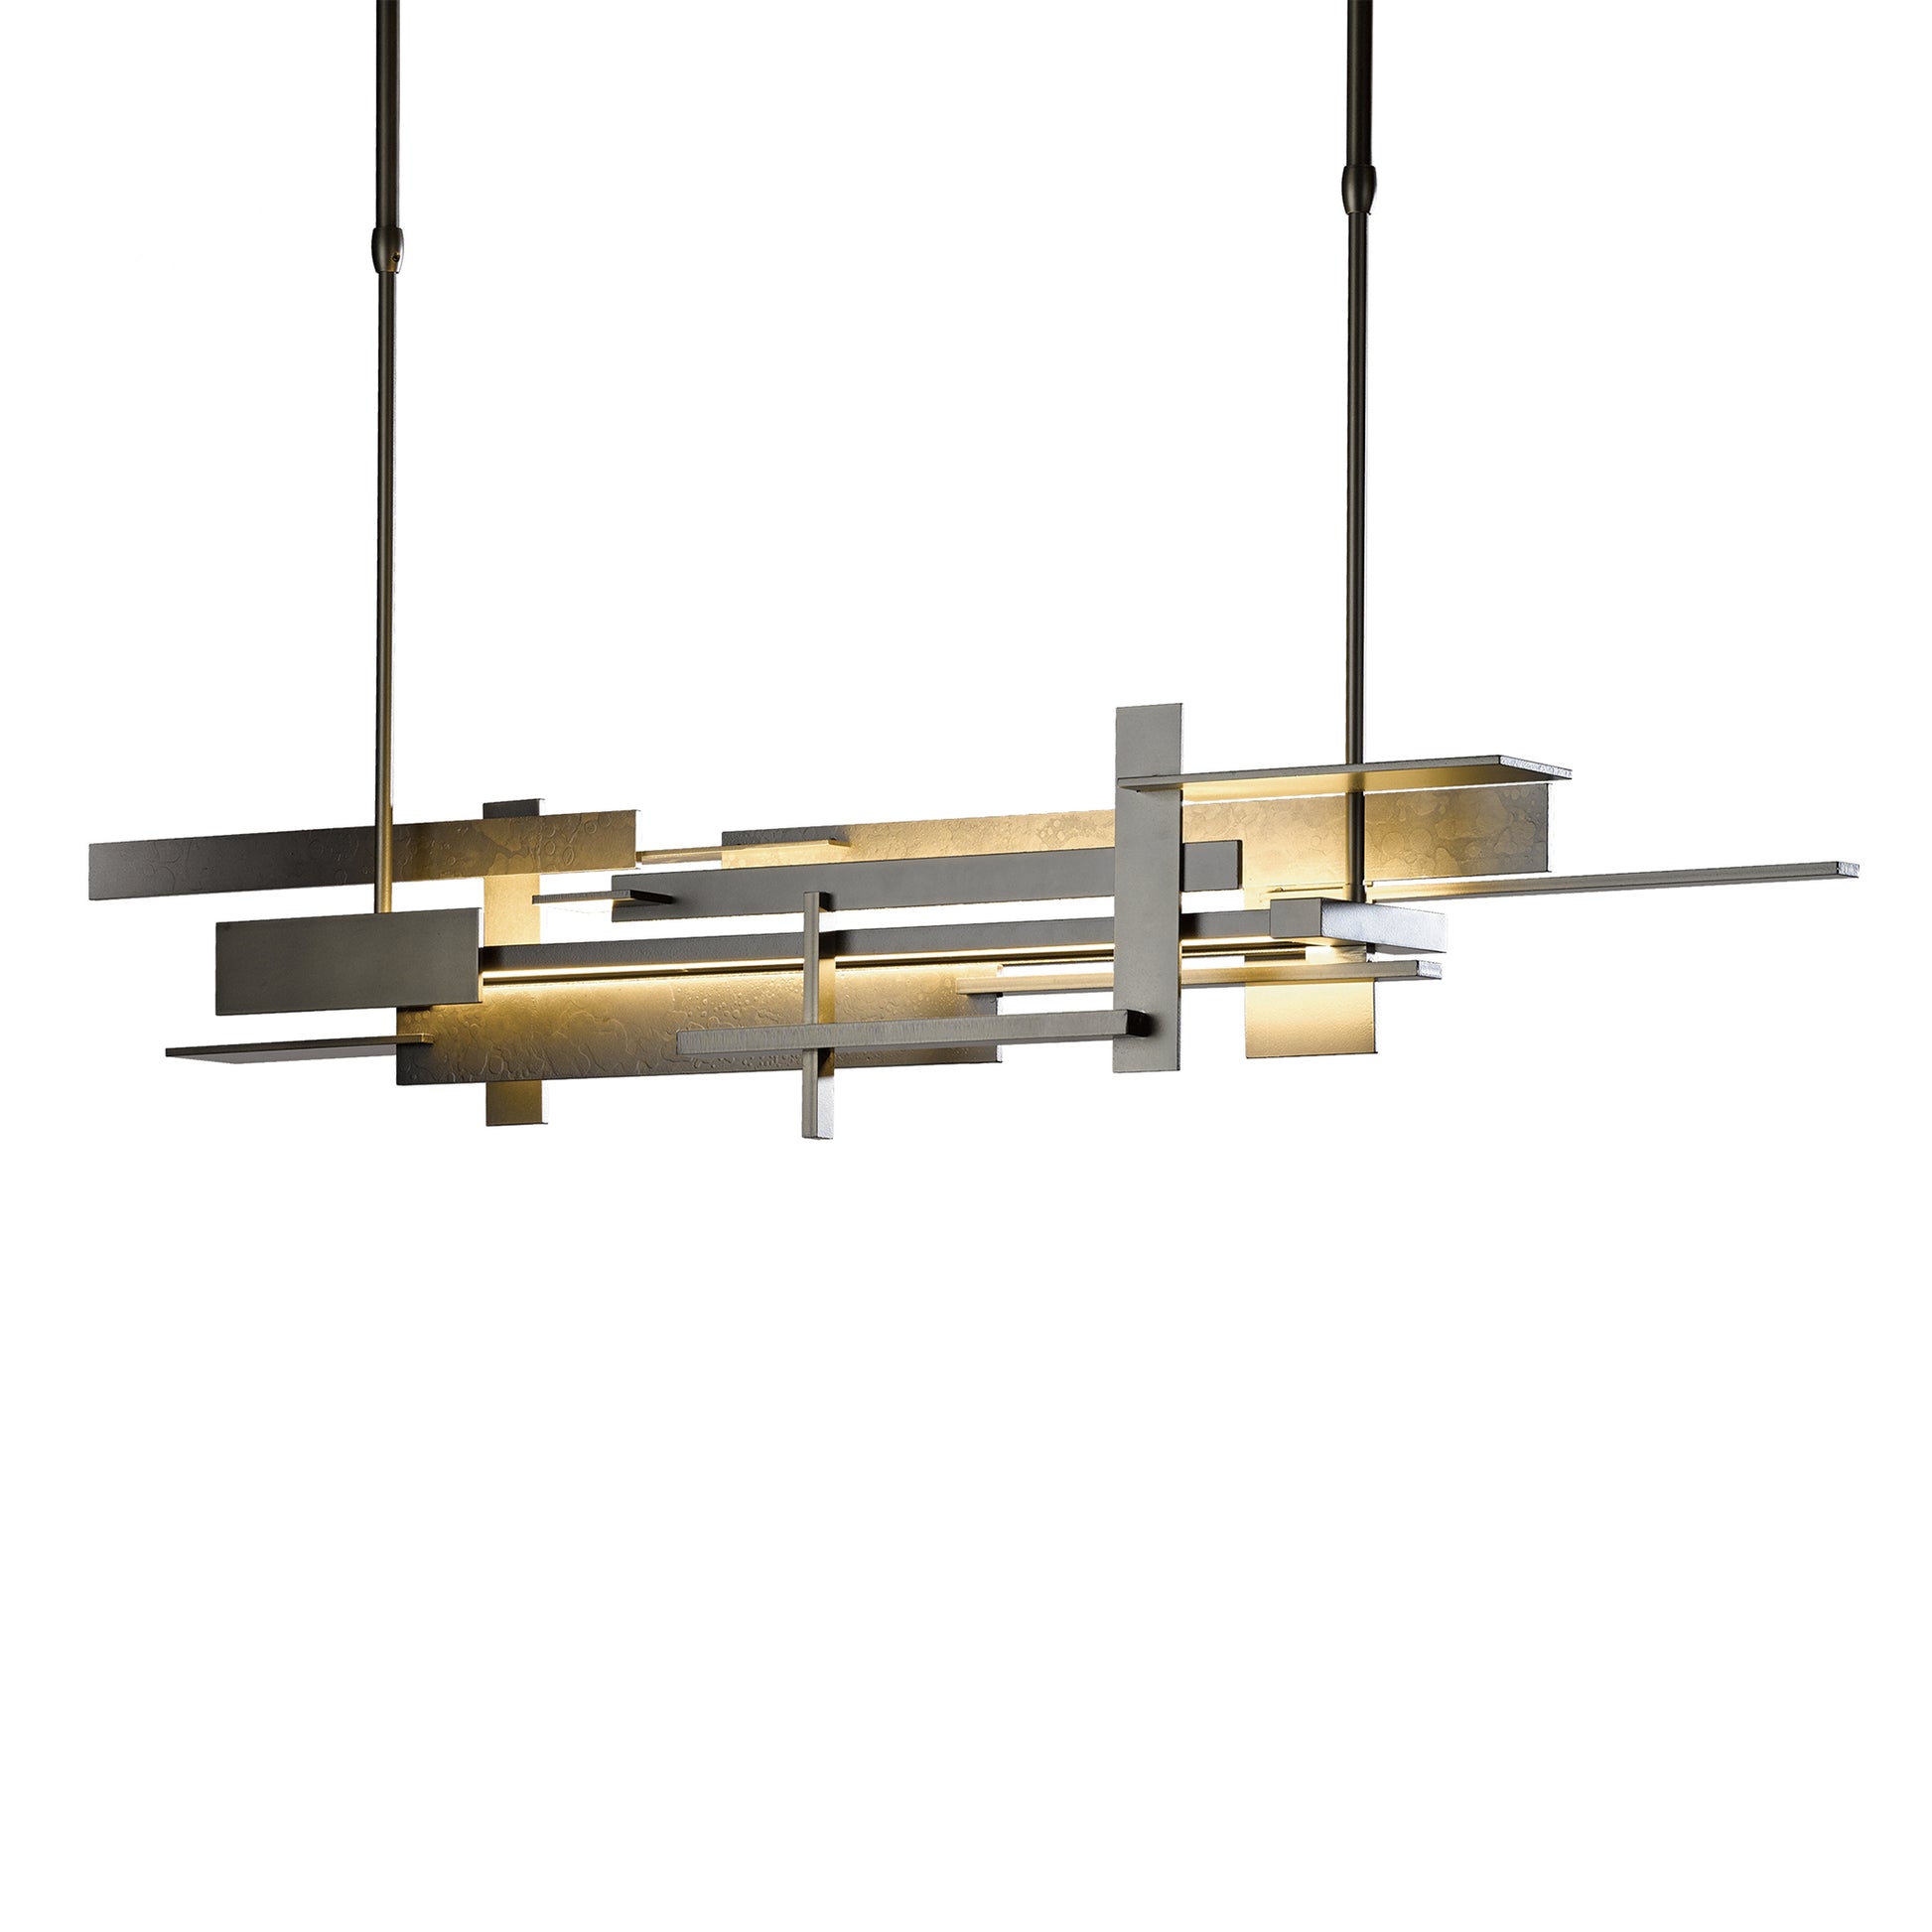 A Hubbardton Forge Planar LED Pendant, a Frank Lloyd Wright-inspired modern light fixture with metal bars hanging from it.